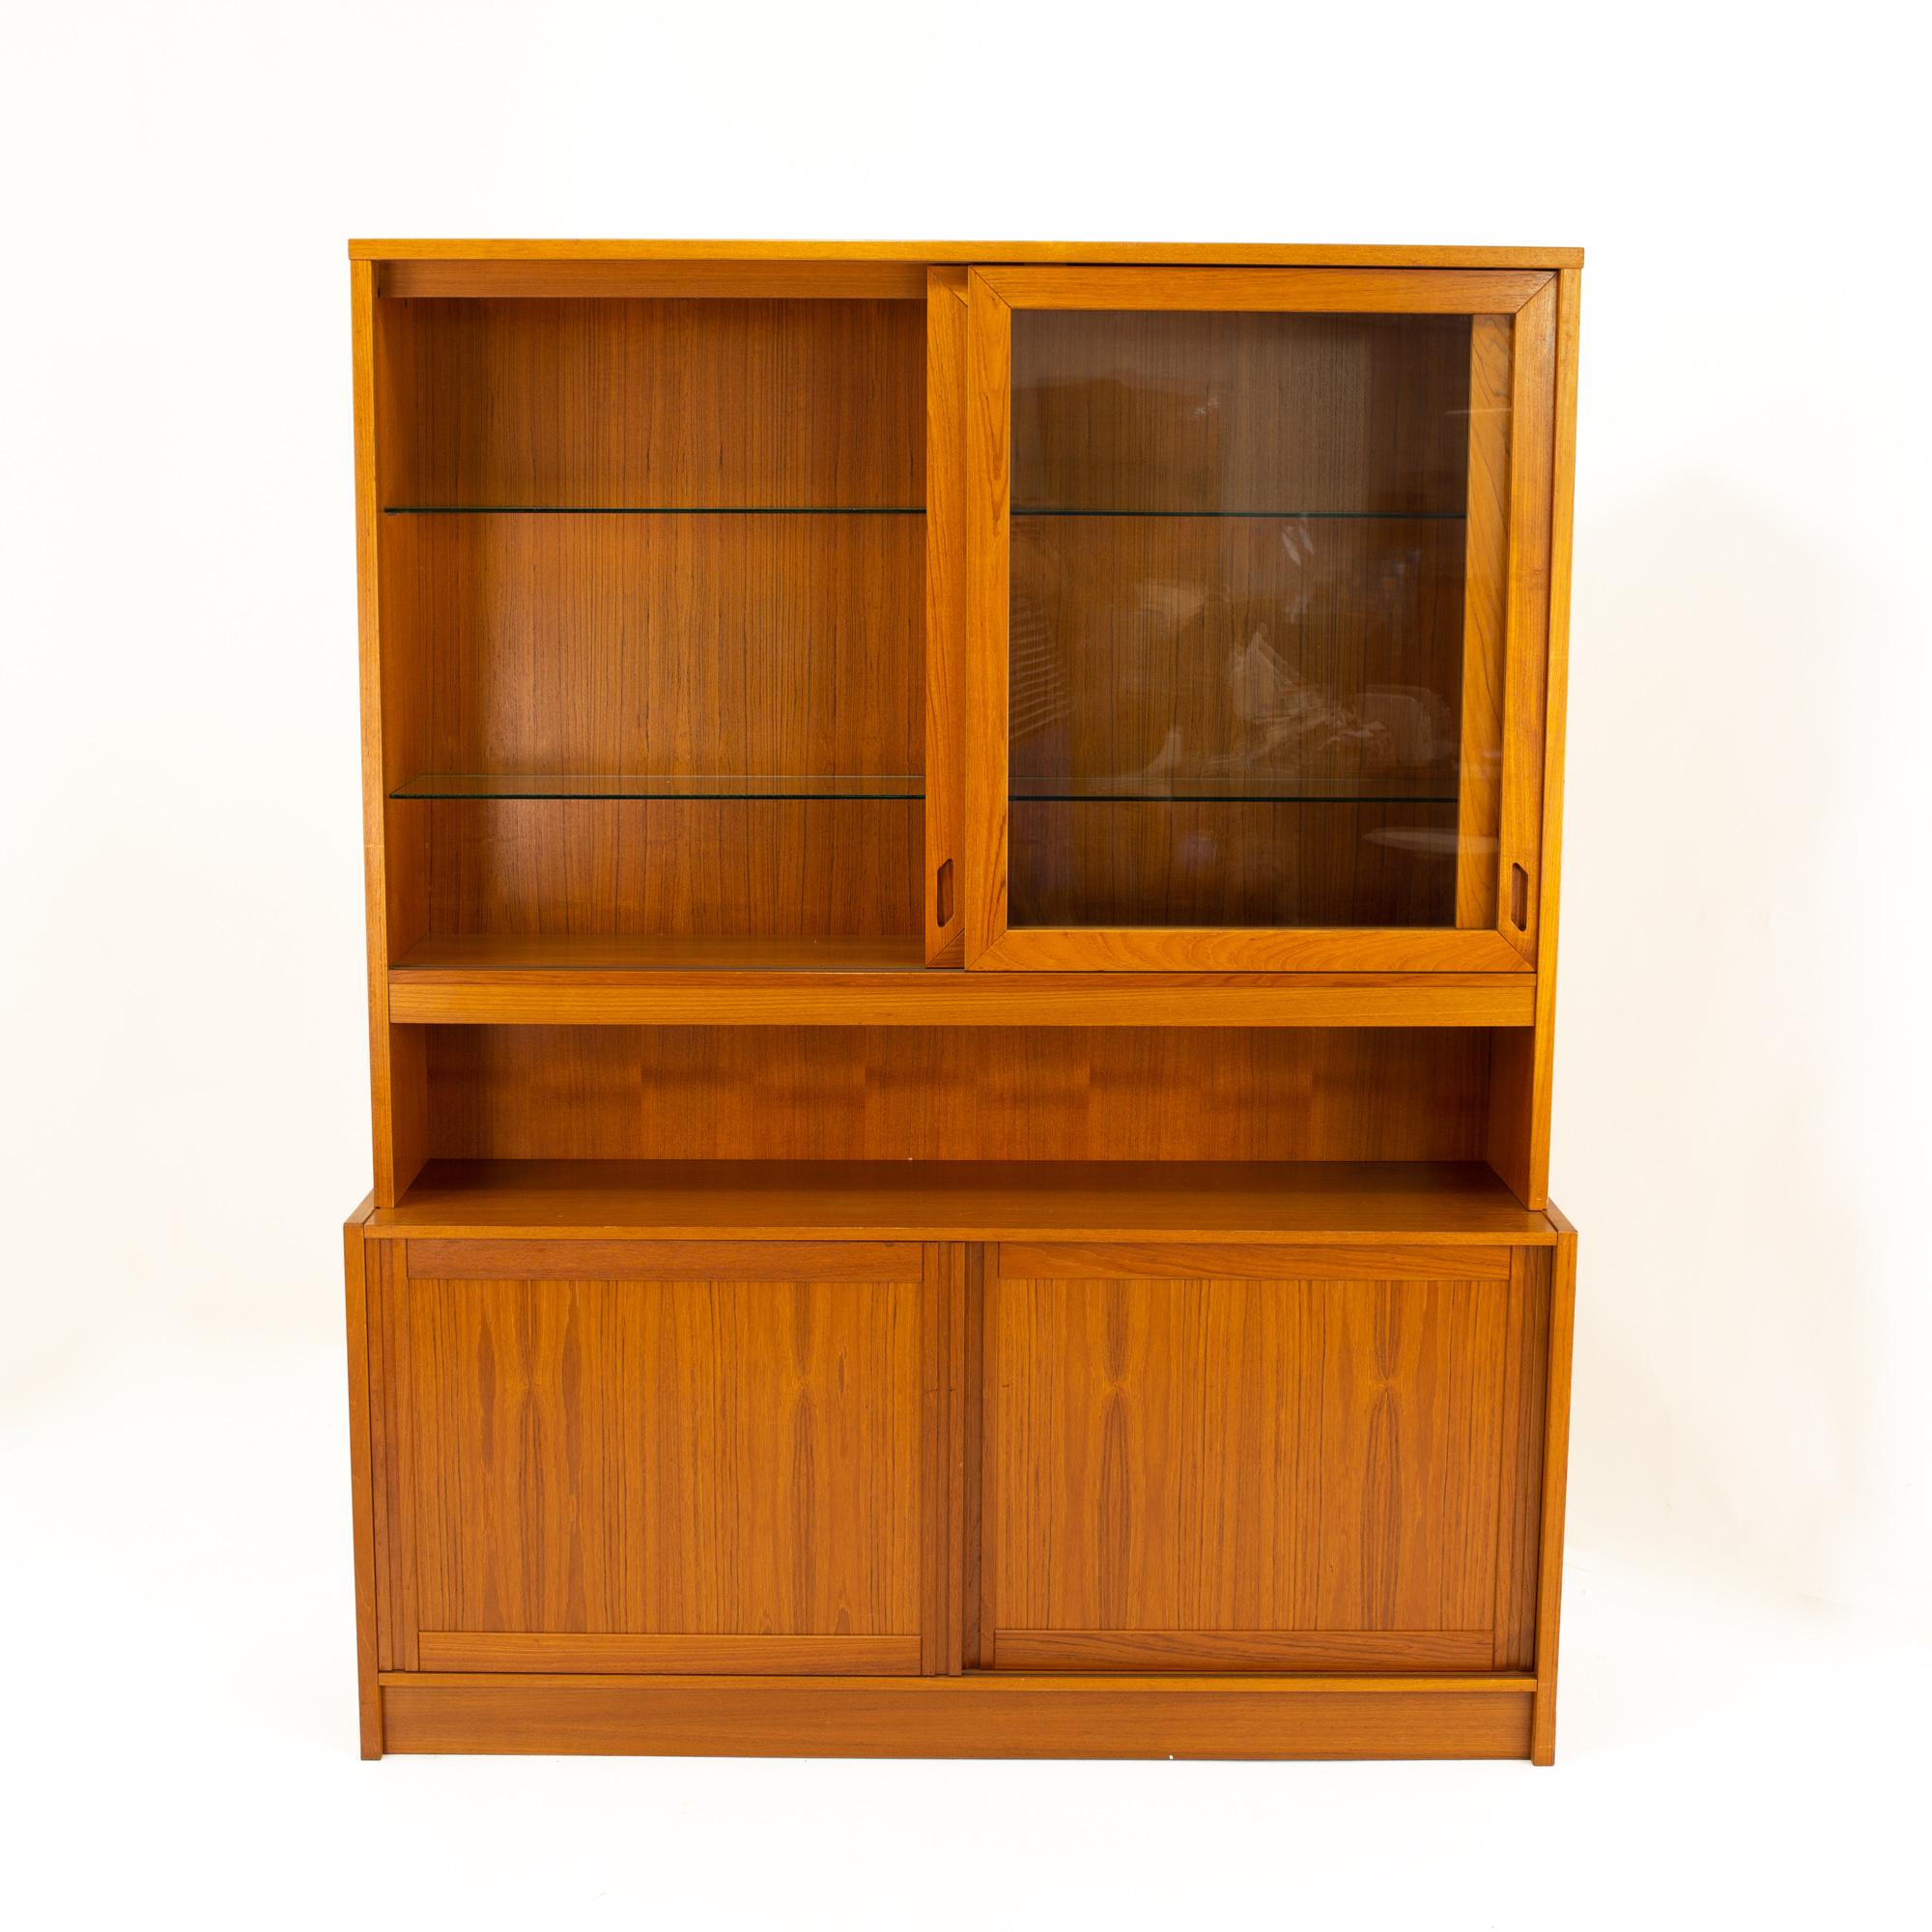 Mid century Danish teak sliding door credenza buffet and hutch
Credenza and hutch measures: 60 wide x 16 deep x 74.5 high

All pieces of furniture can be had in what we call restored vintage condition. This means the piece is restored upon